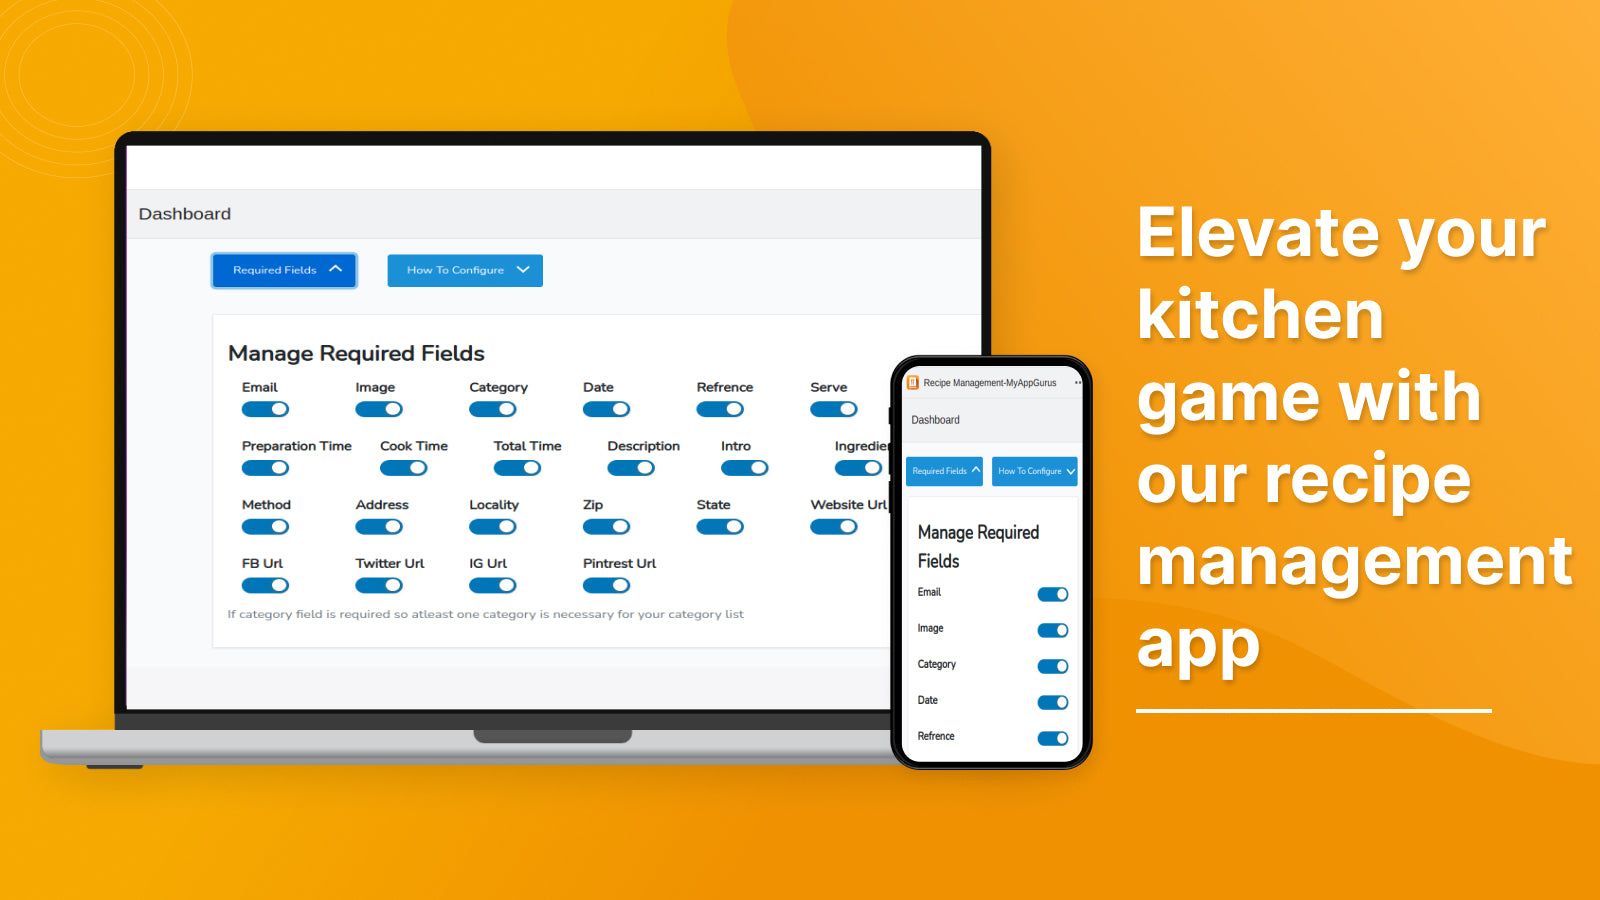 Elevate your kitchen game with our recipe management app